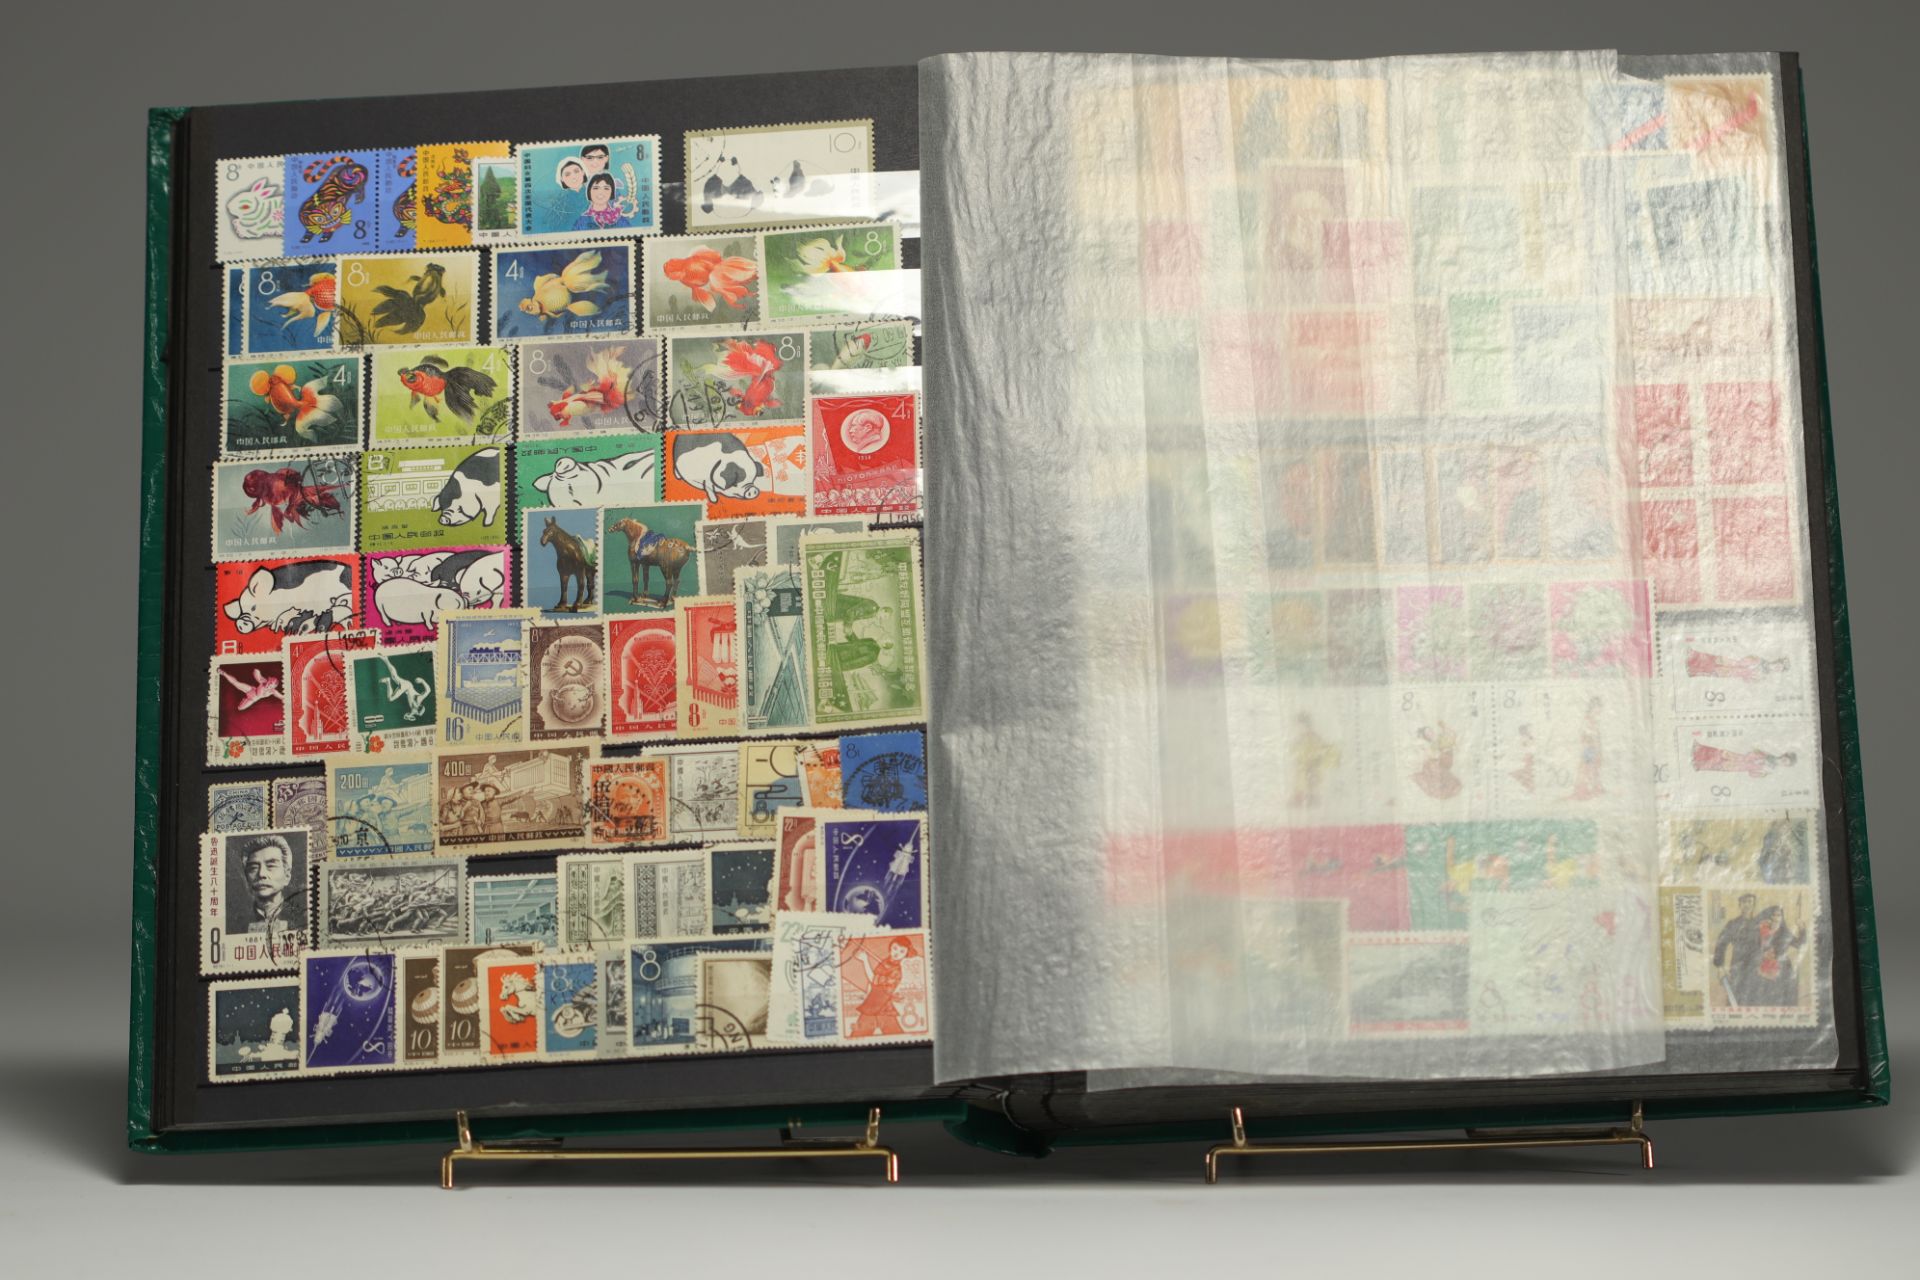 Set of 21 albums of world stamps, China, Japan, Middle East, Europe, etc. (Batch 1) - Image 14 of 14